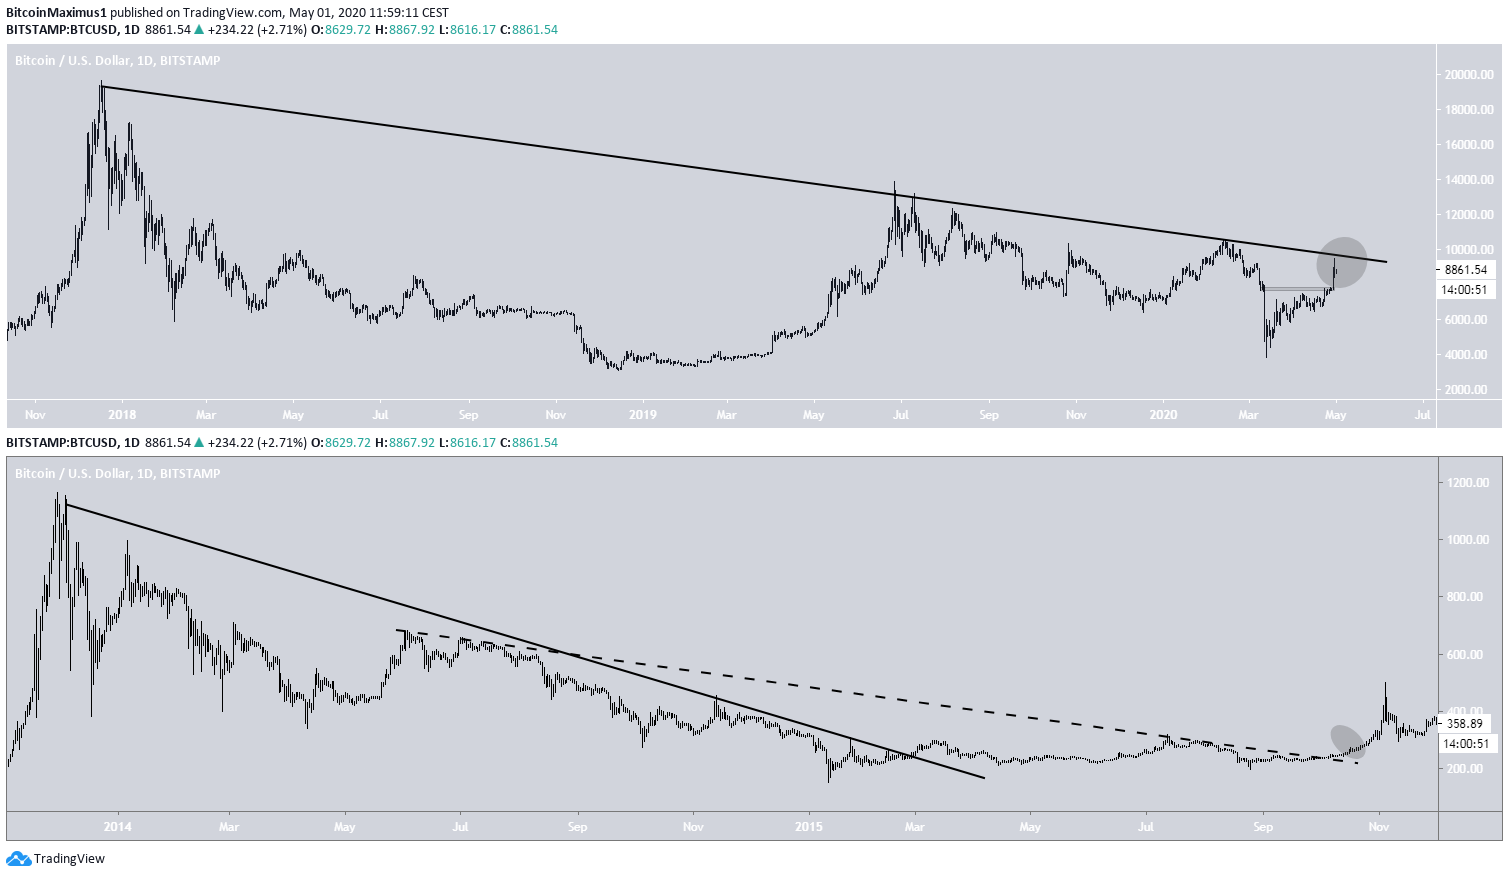 Bitcoin Side-By-Side comparison